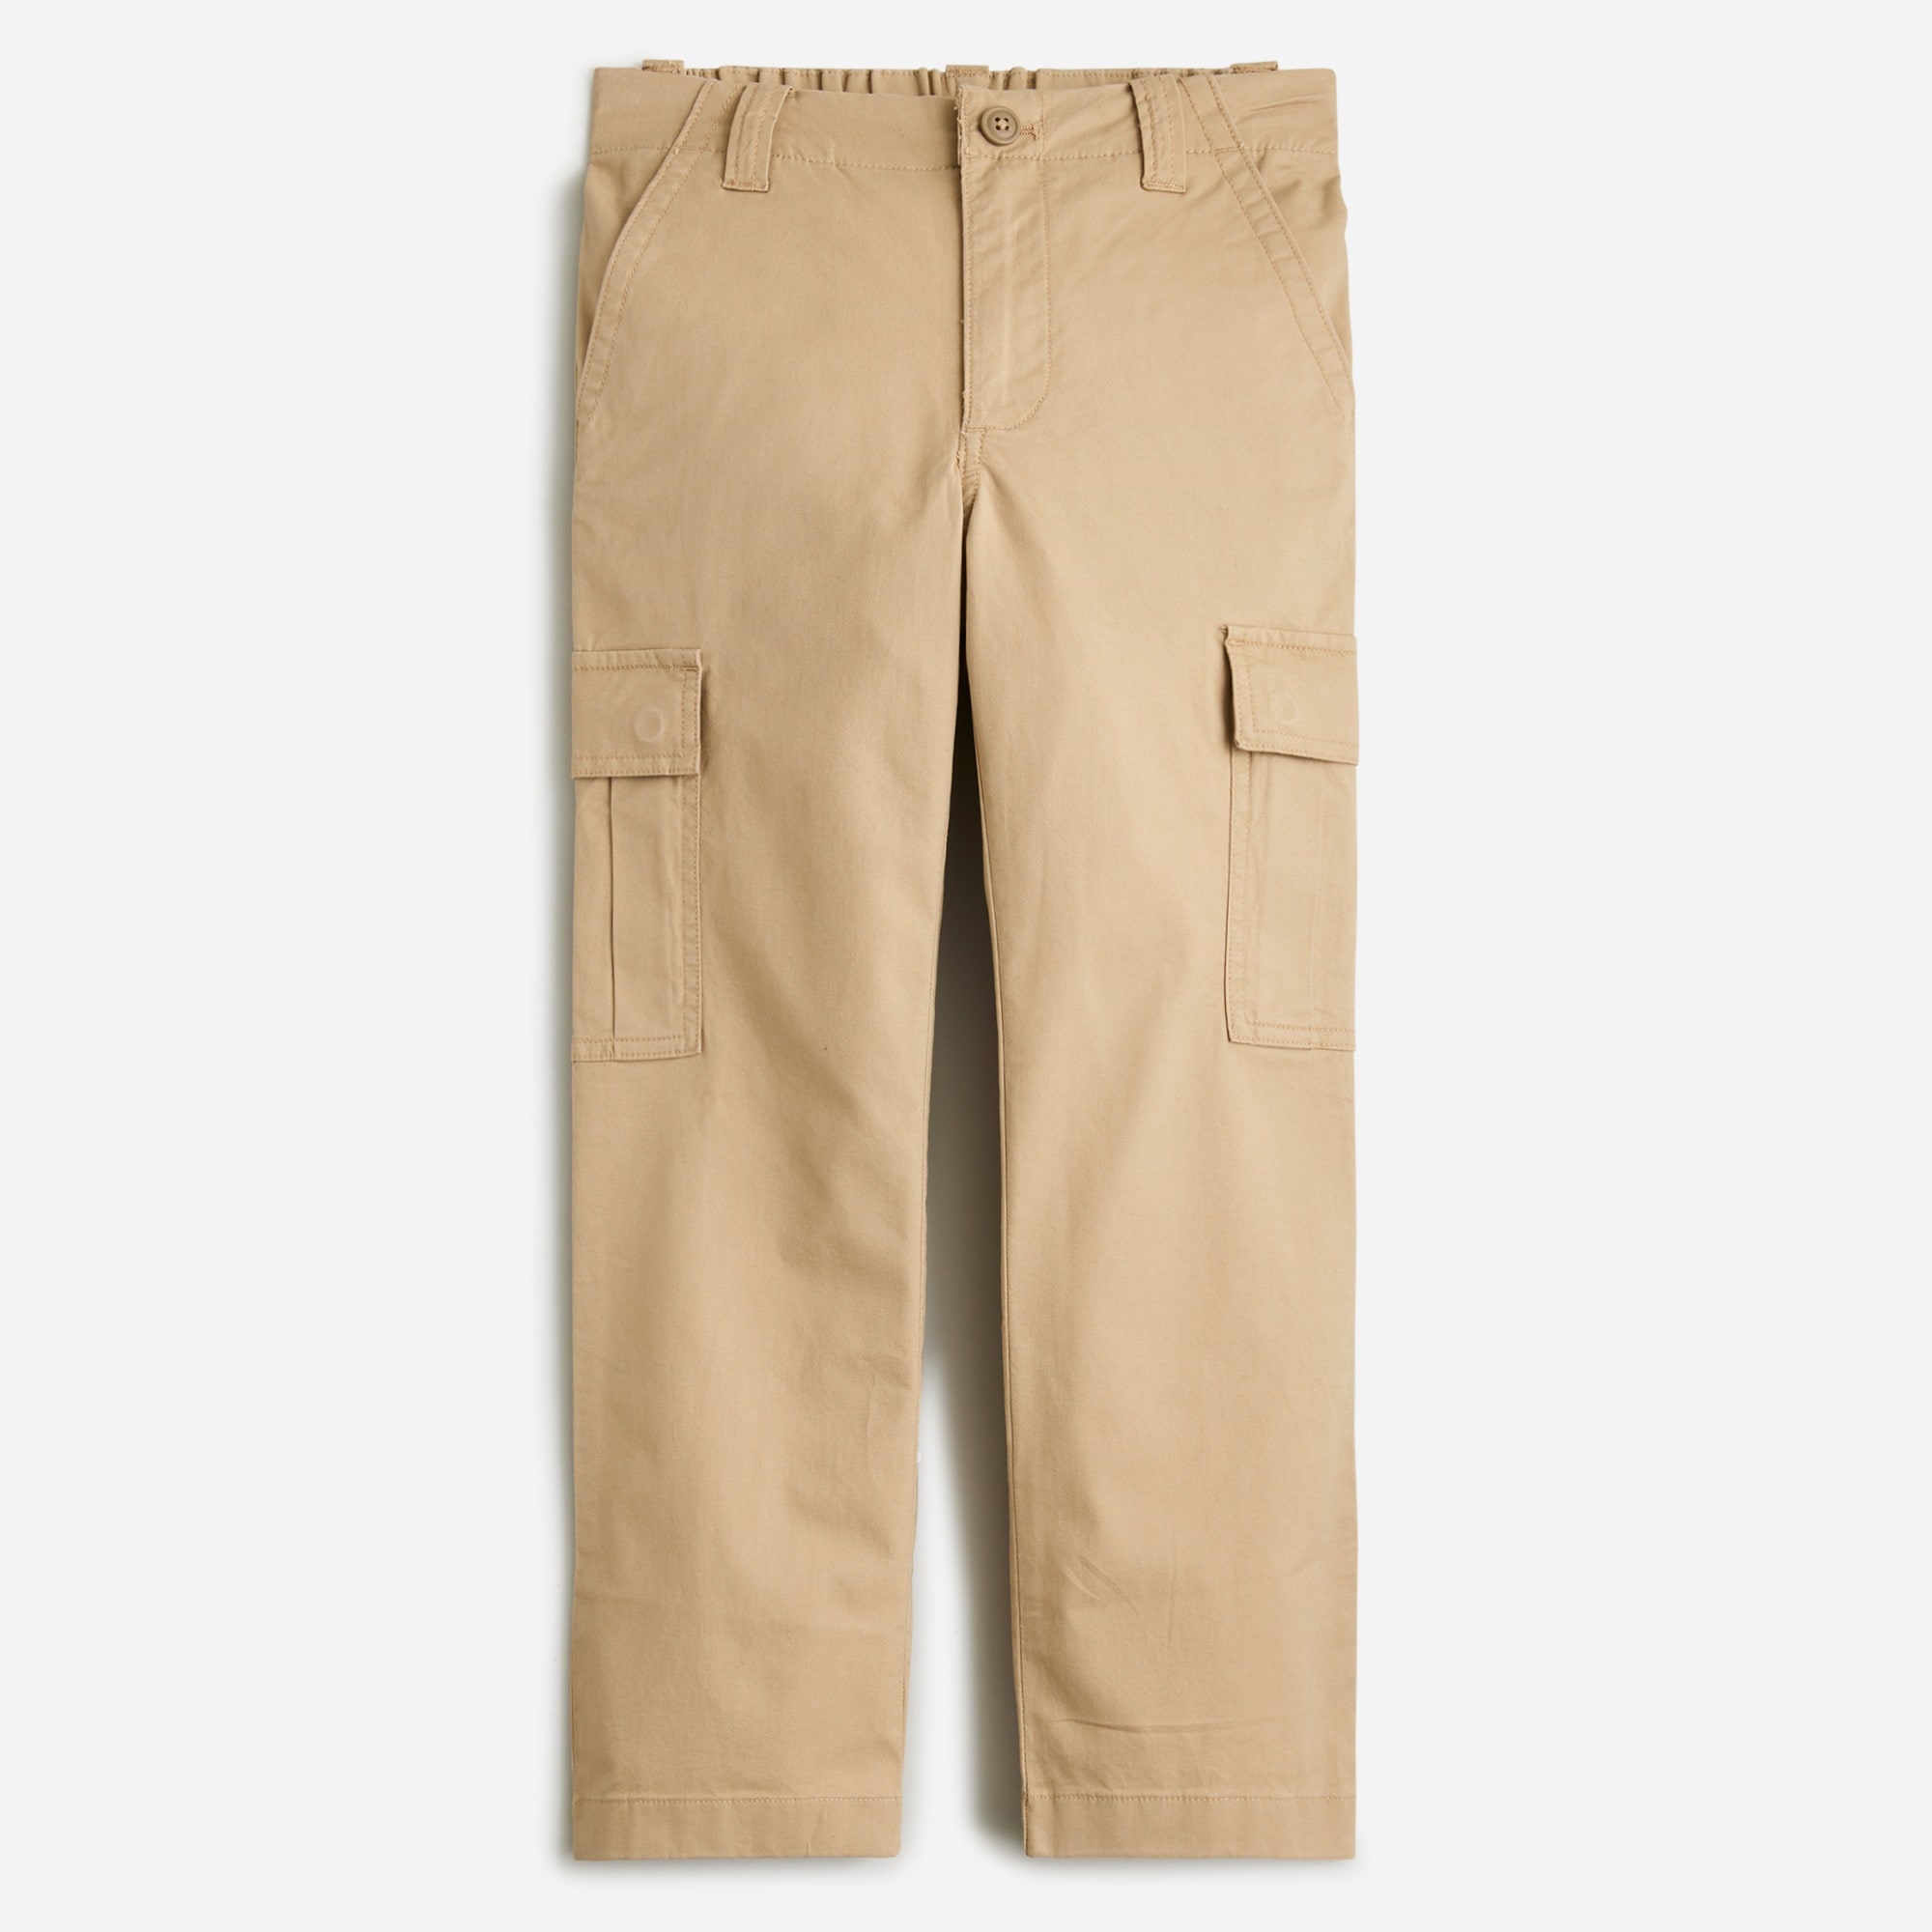  Kids' cargo pant in stretch twill